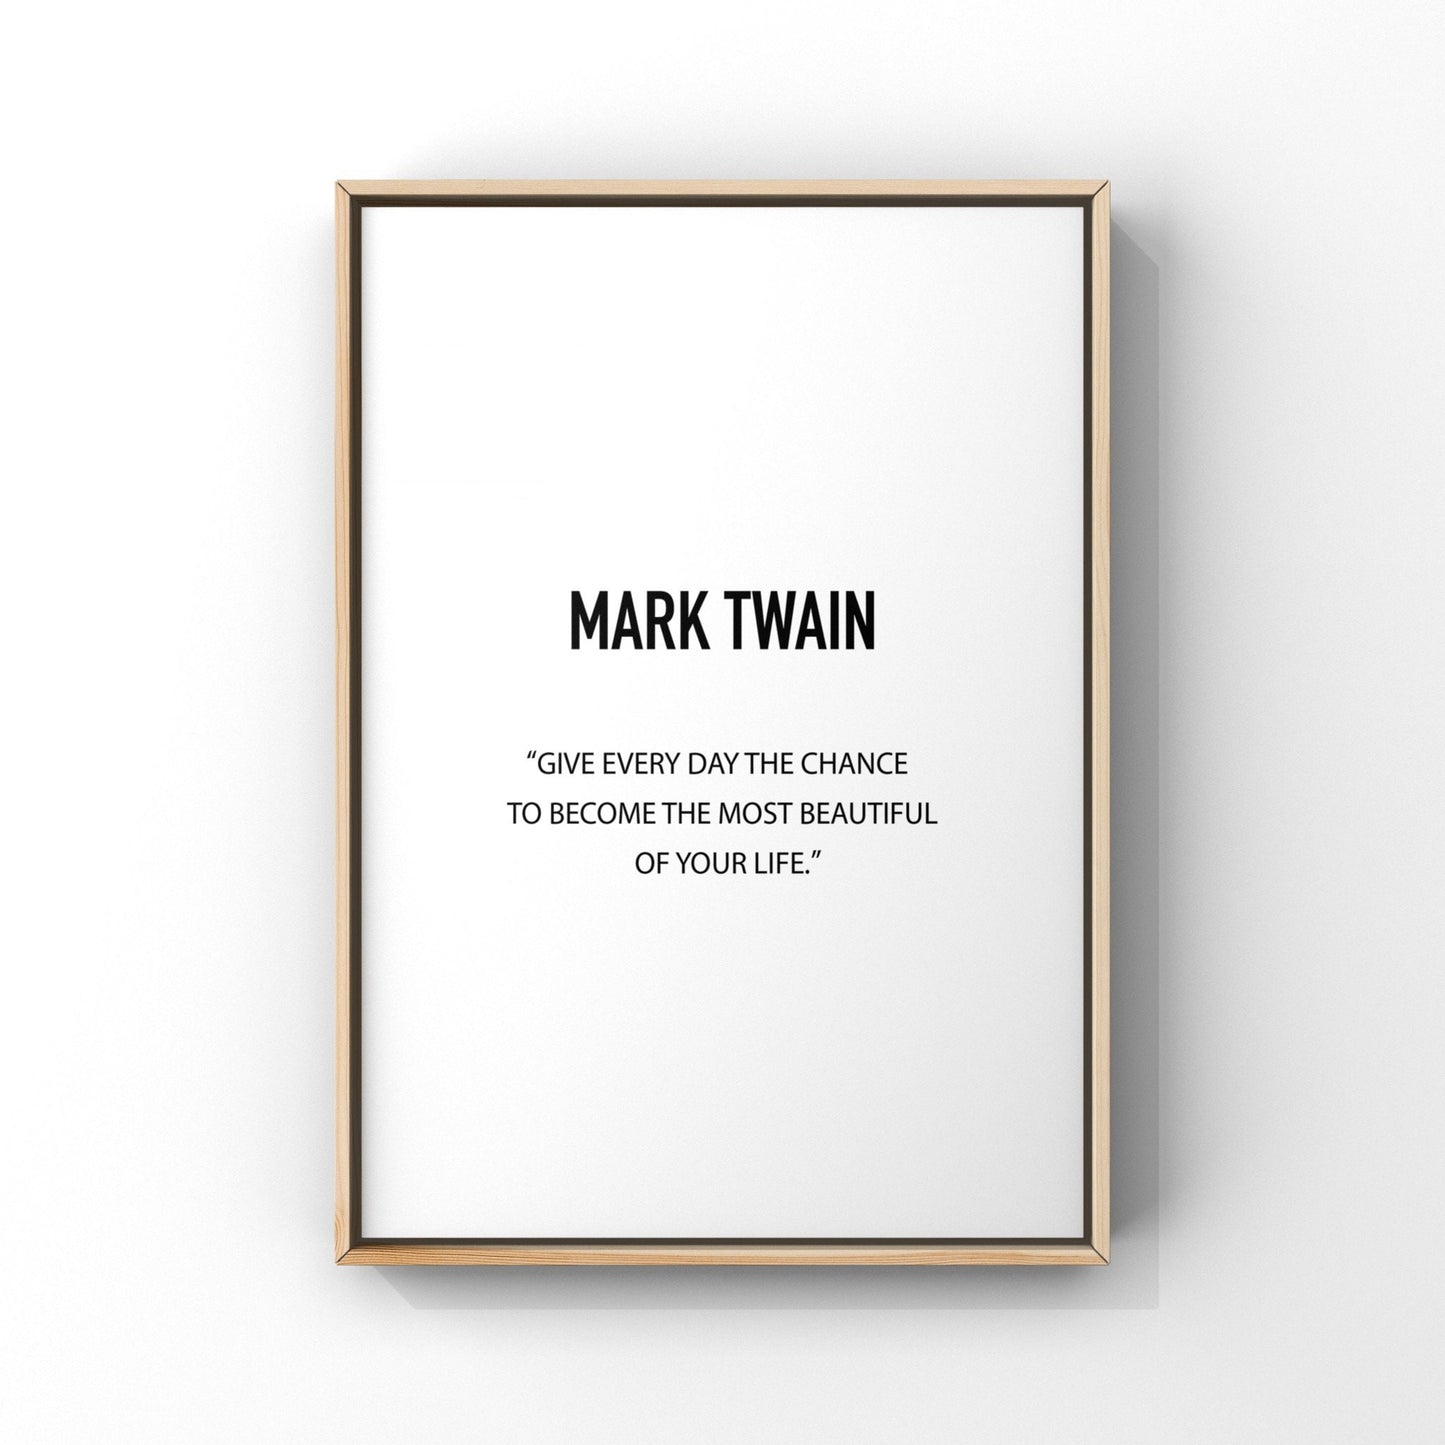 Give every day a chance to become the most beautiful of your life,Mark Twain quote,Mark Twain print,Inspirational print,Motivational saying